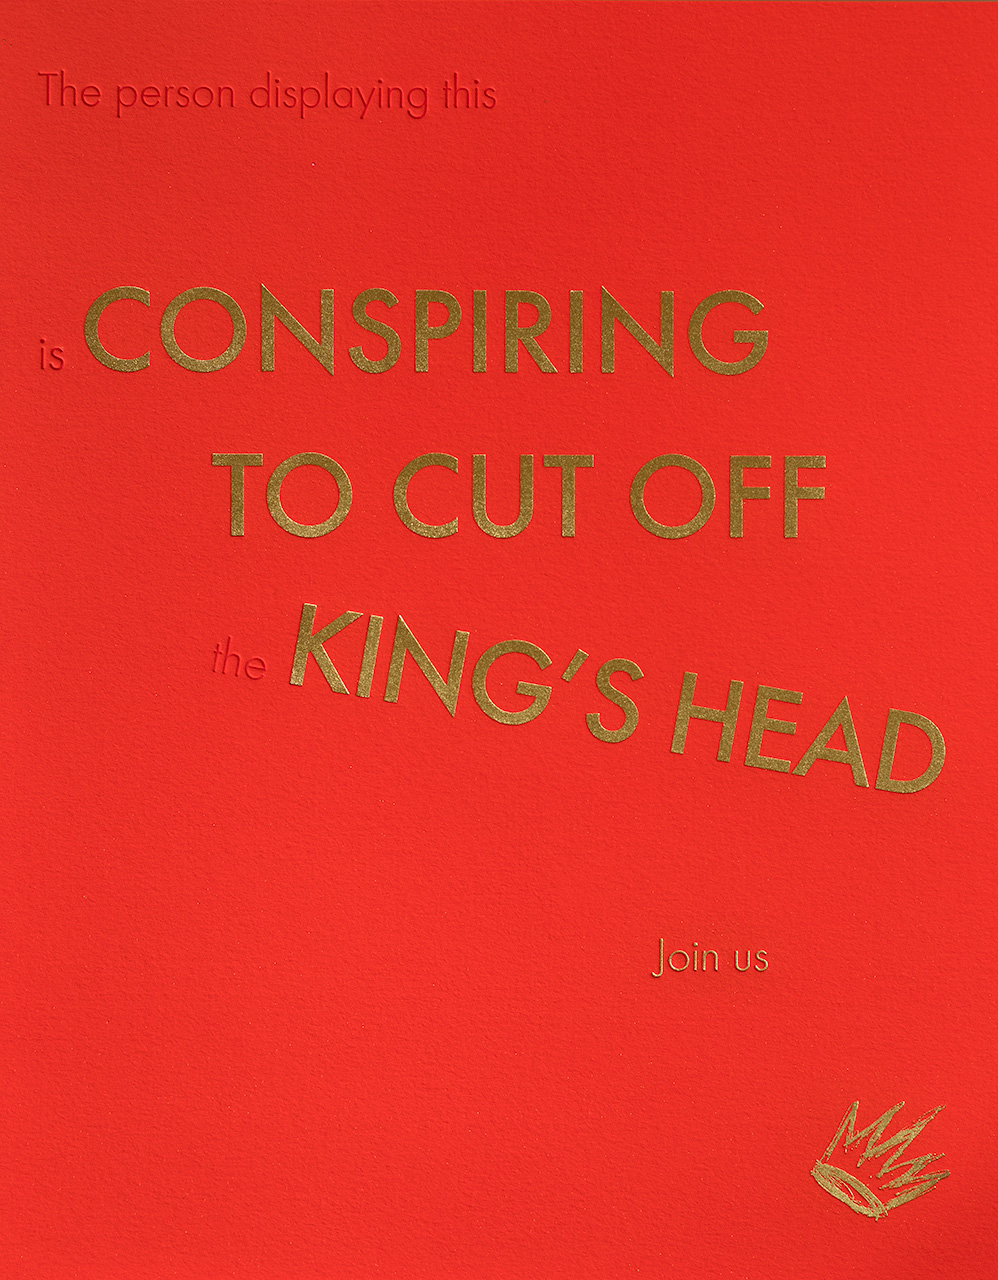 Conspiring to Cut off the King’s Head, 2017, 11 x 14 inches, screen print